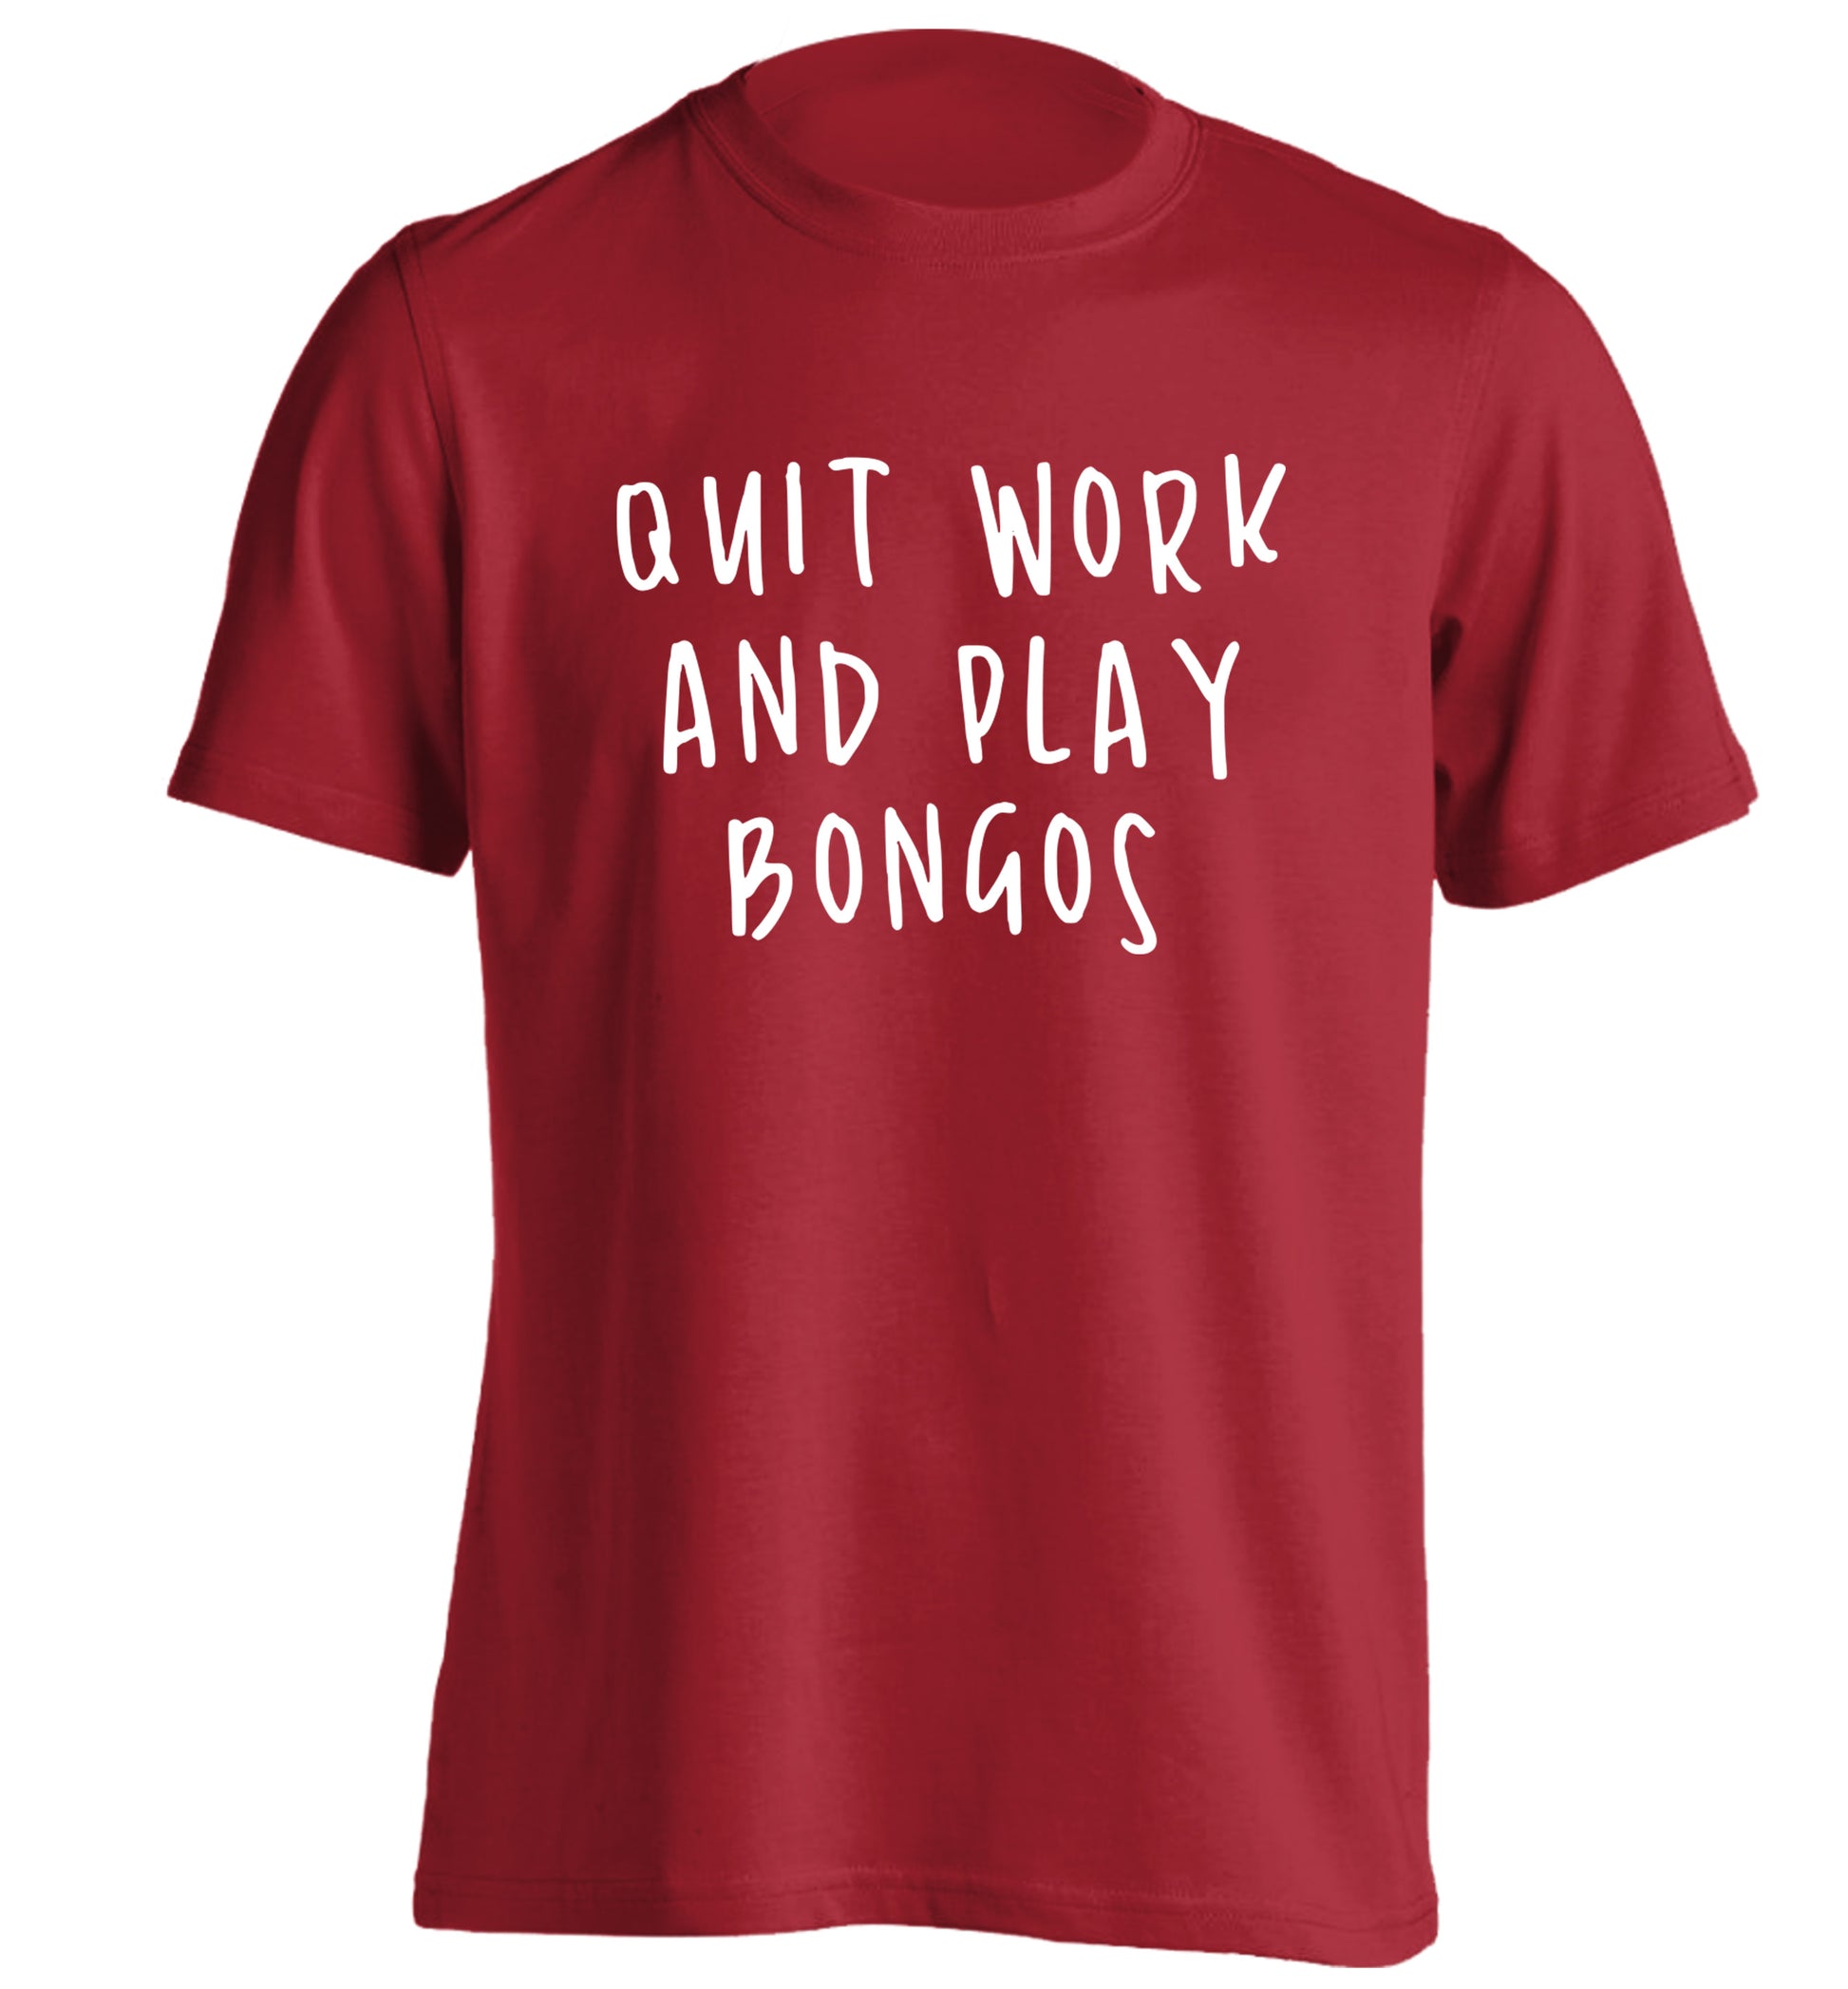 Quit work and play bongos adults unisex red Tshirt 2XL